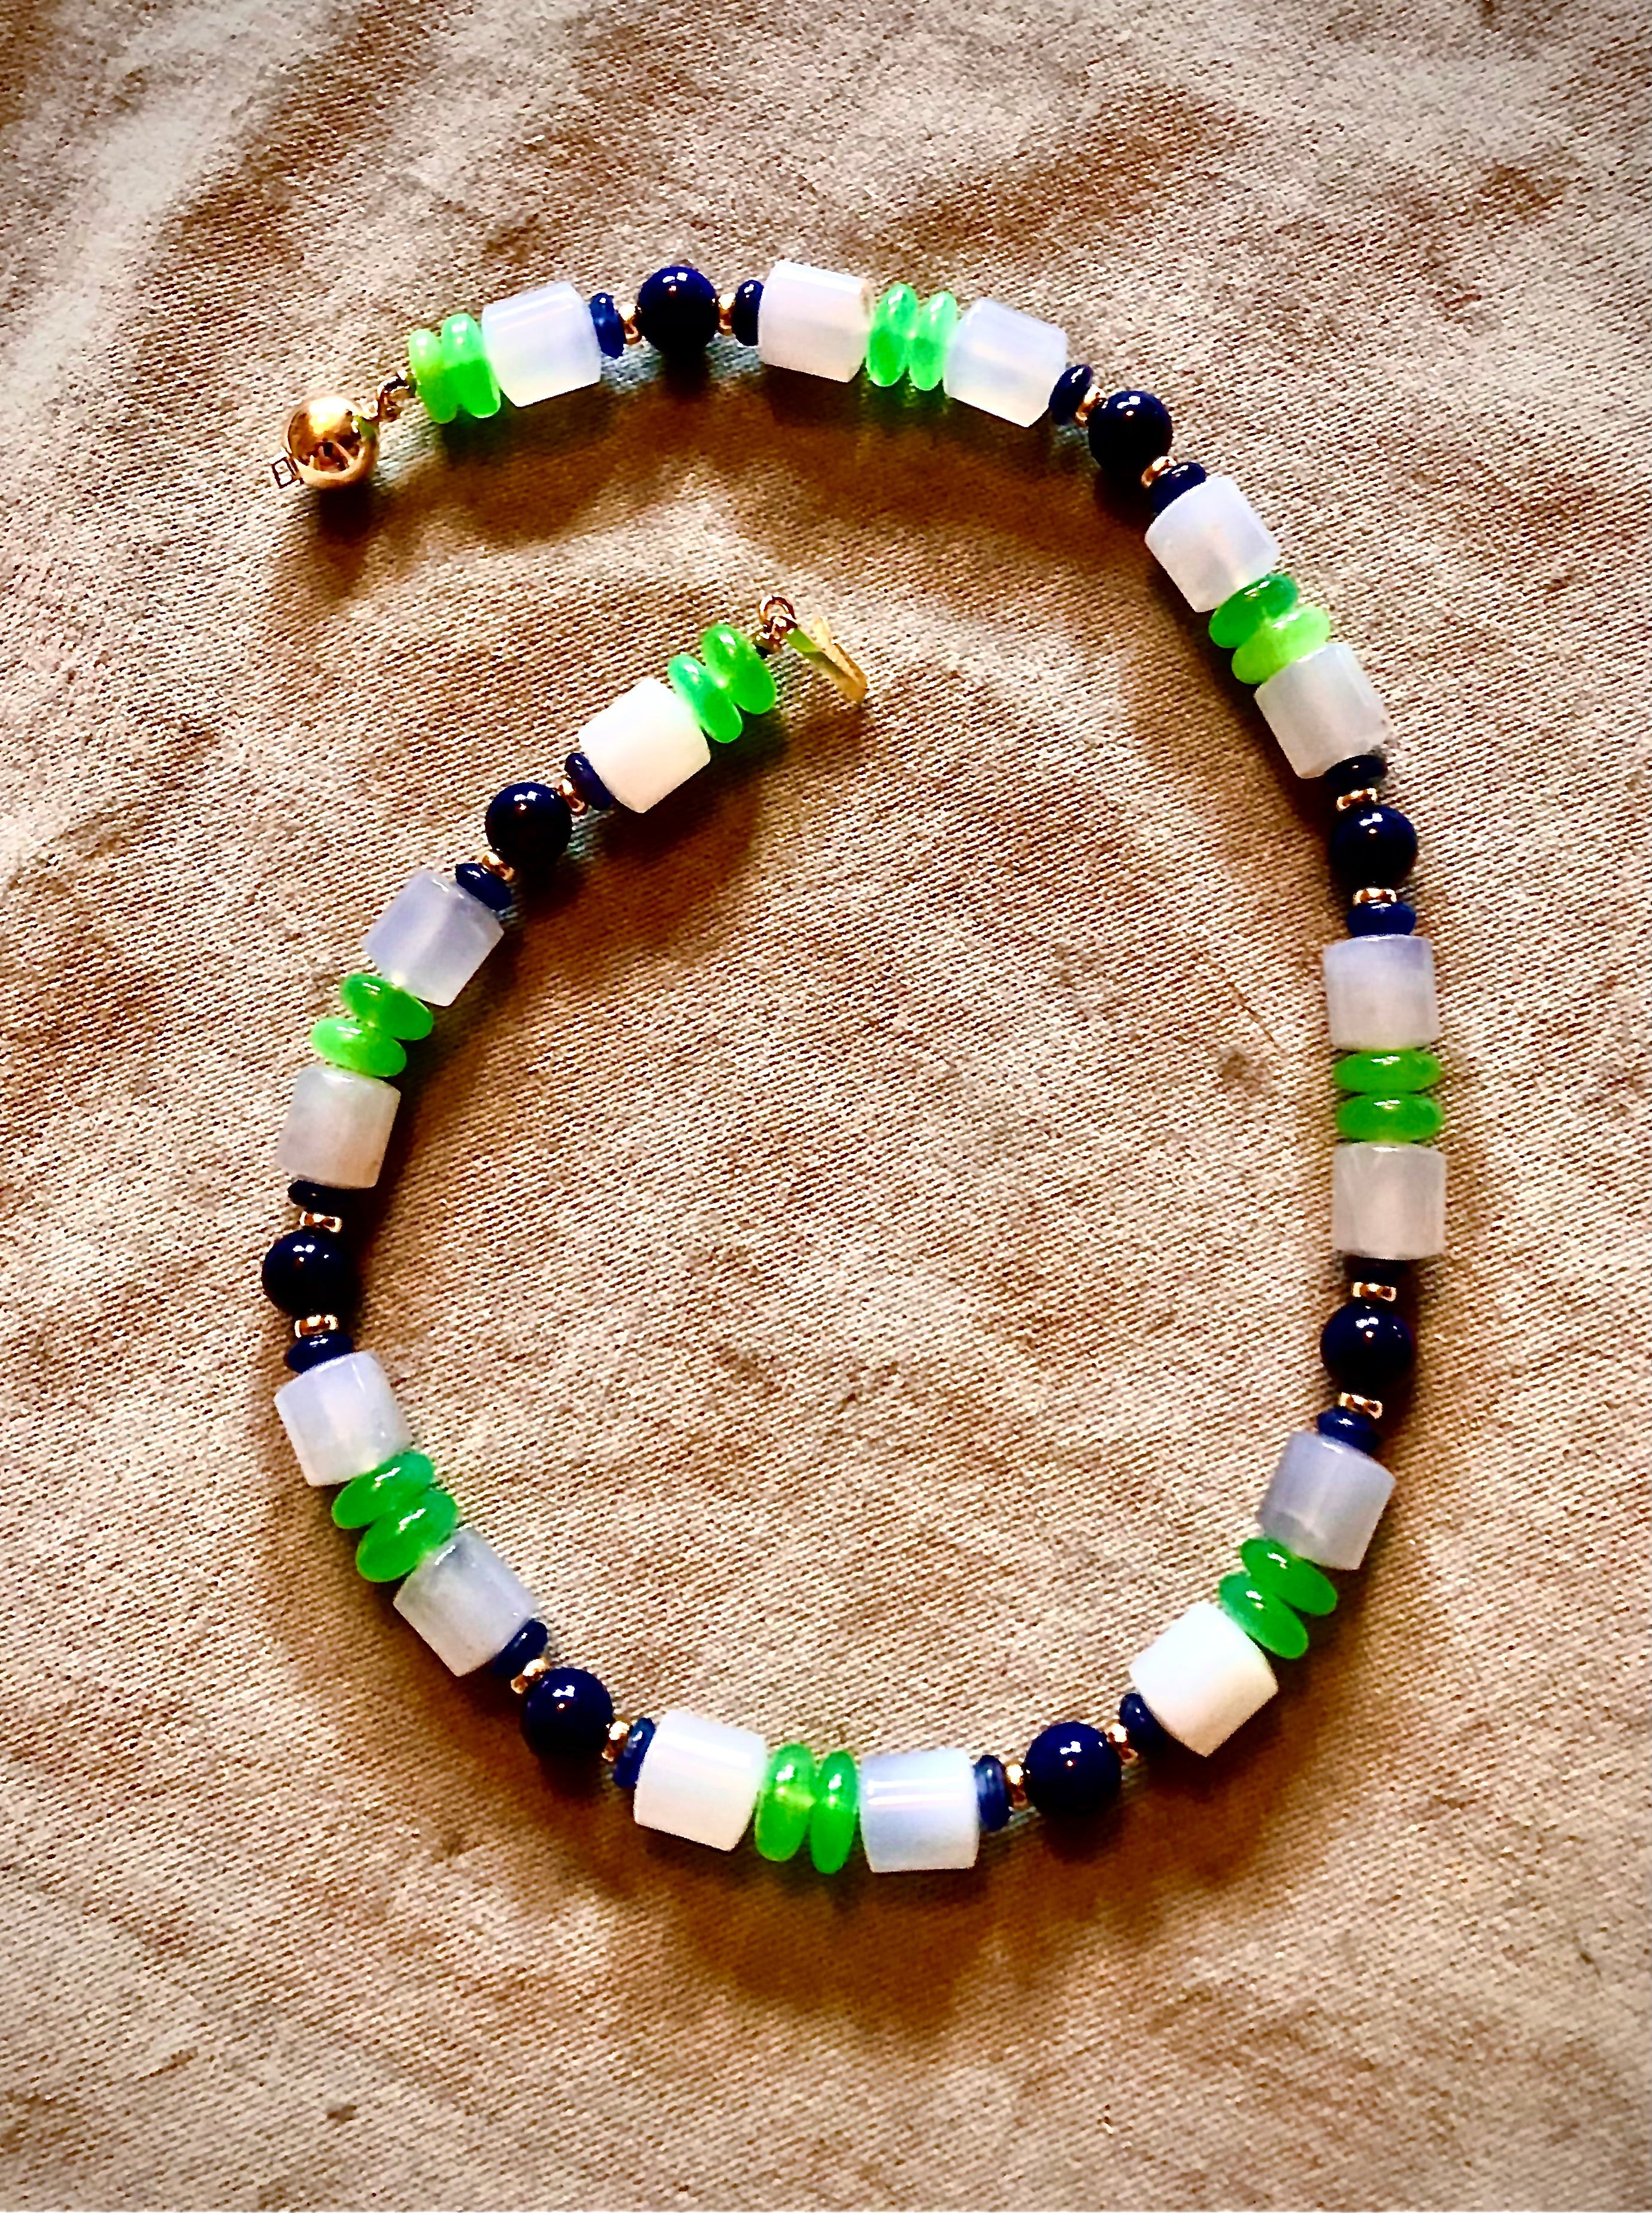 Chalcedony, chrysoprase, lapis lazuli, sapphire and 14kt gold necklace